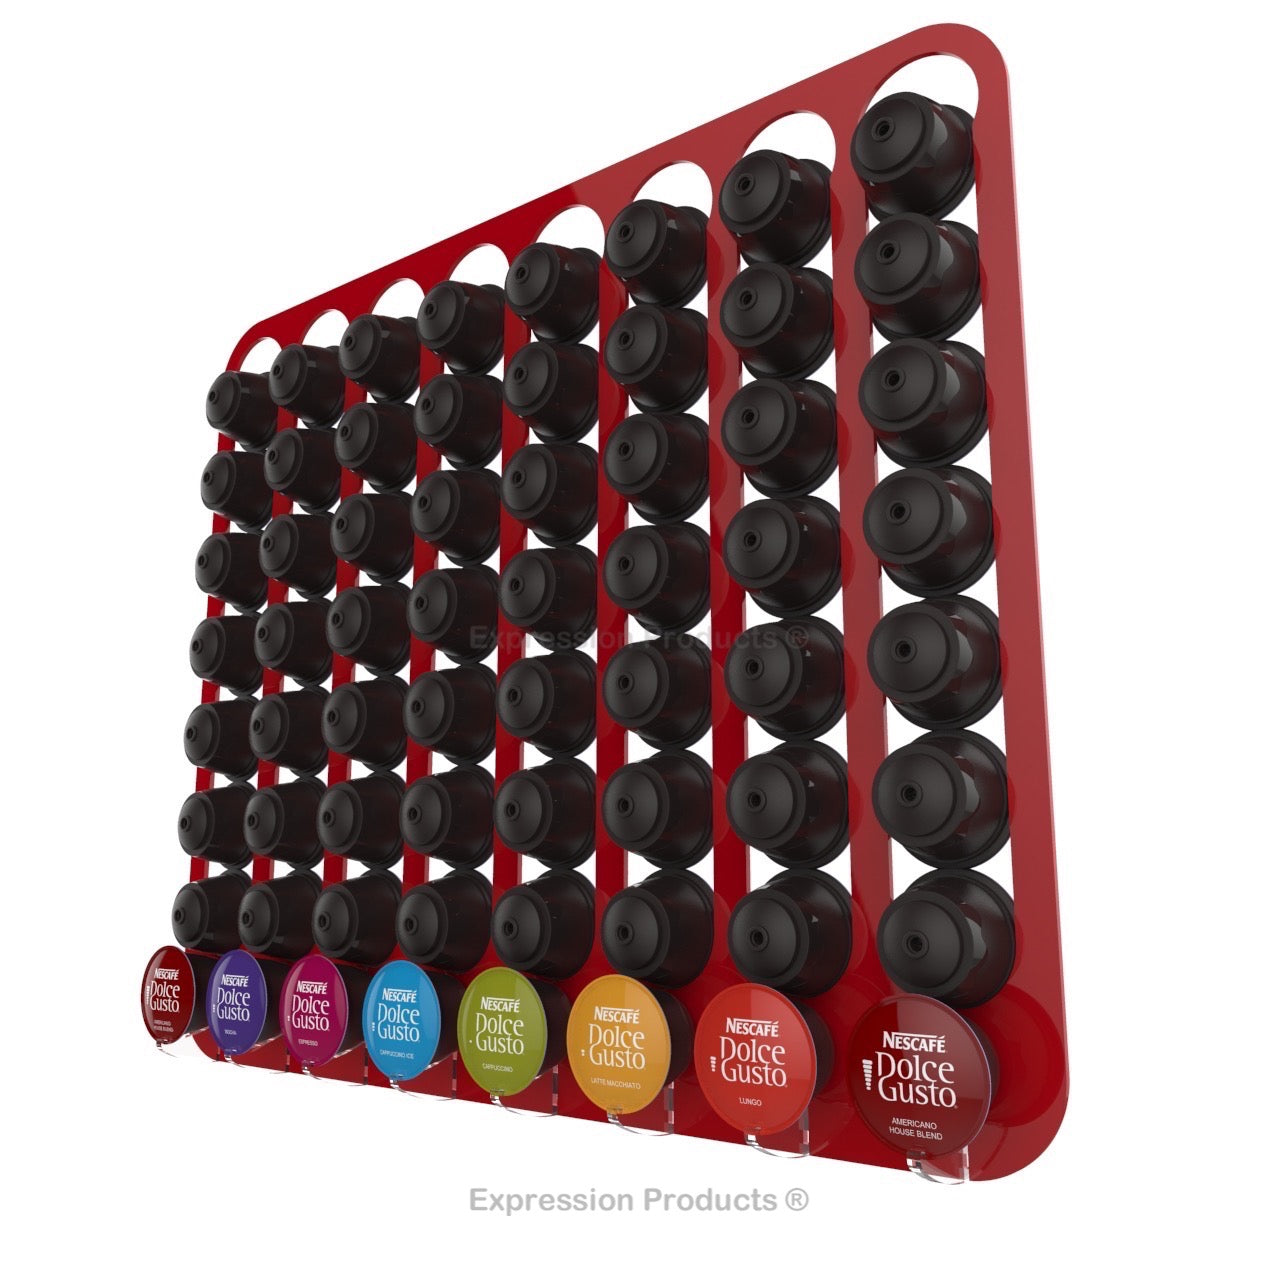 Dolce Gusto Coffee Pod Holder, Wall Mounted.  Shown in Red Holding 64 Pods